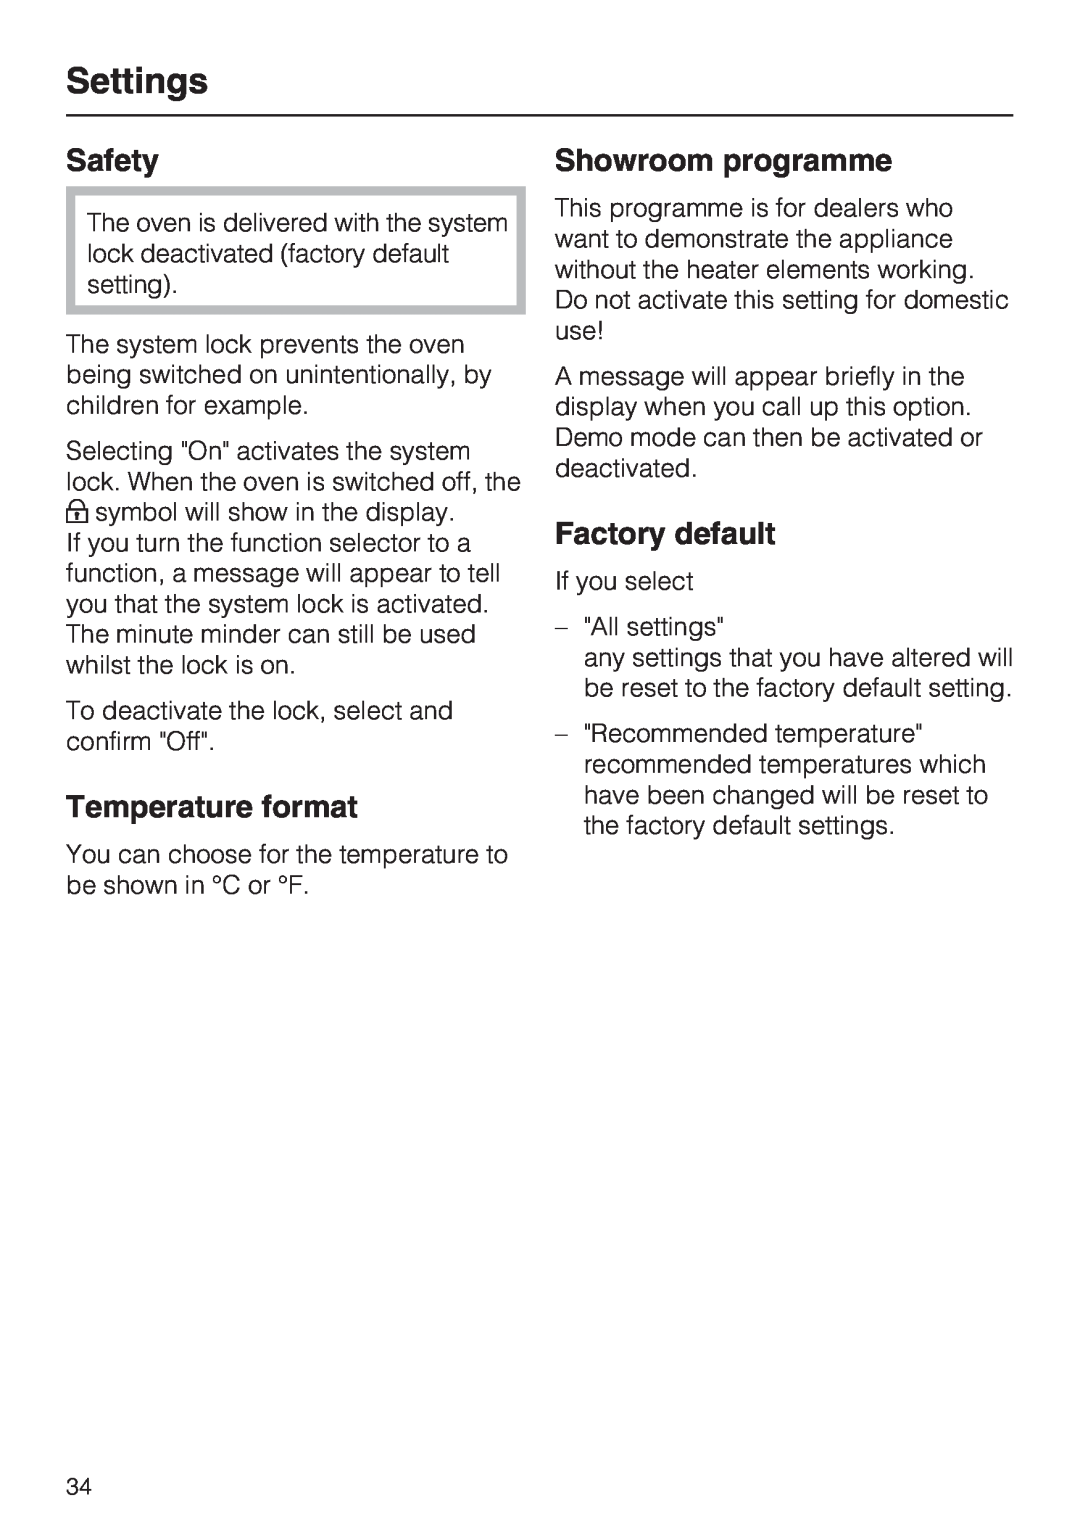 Miele H 5460-BP installation instructions Safety, Temperature format, Showroom programme, Factory default, Settings 